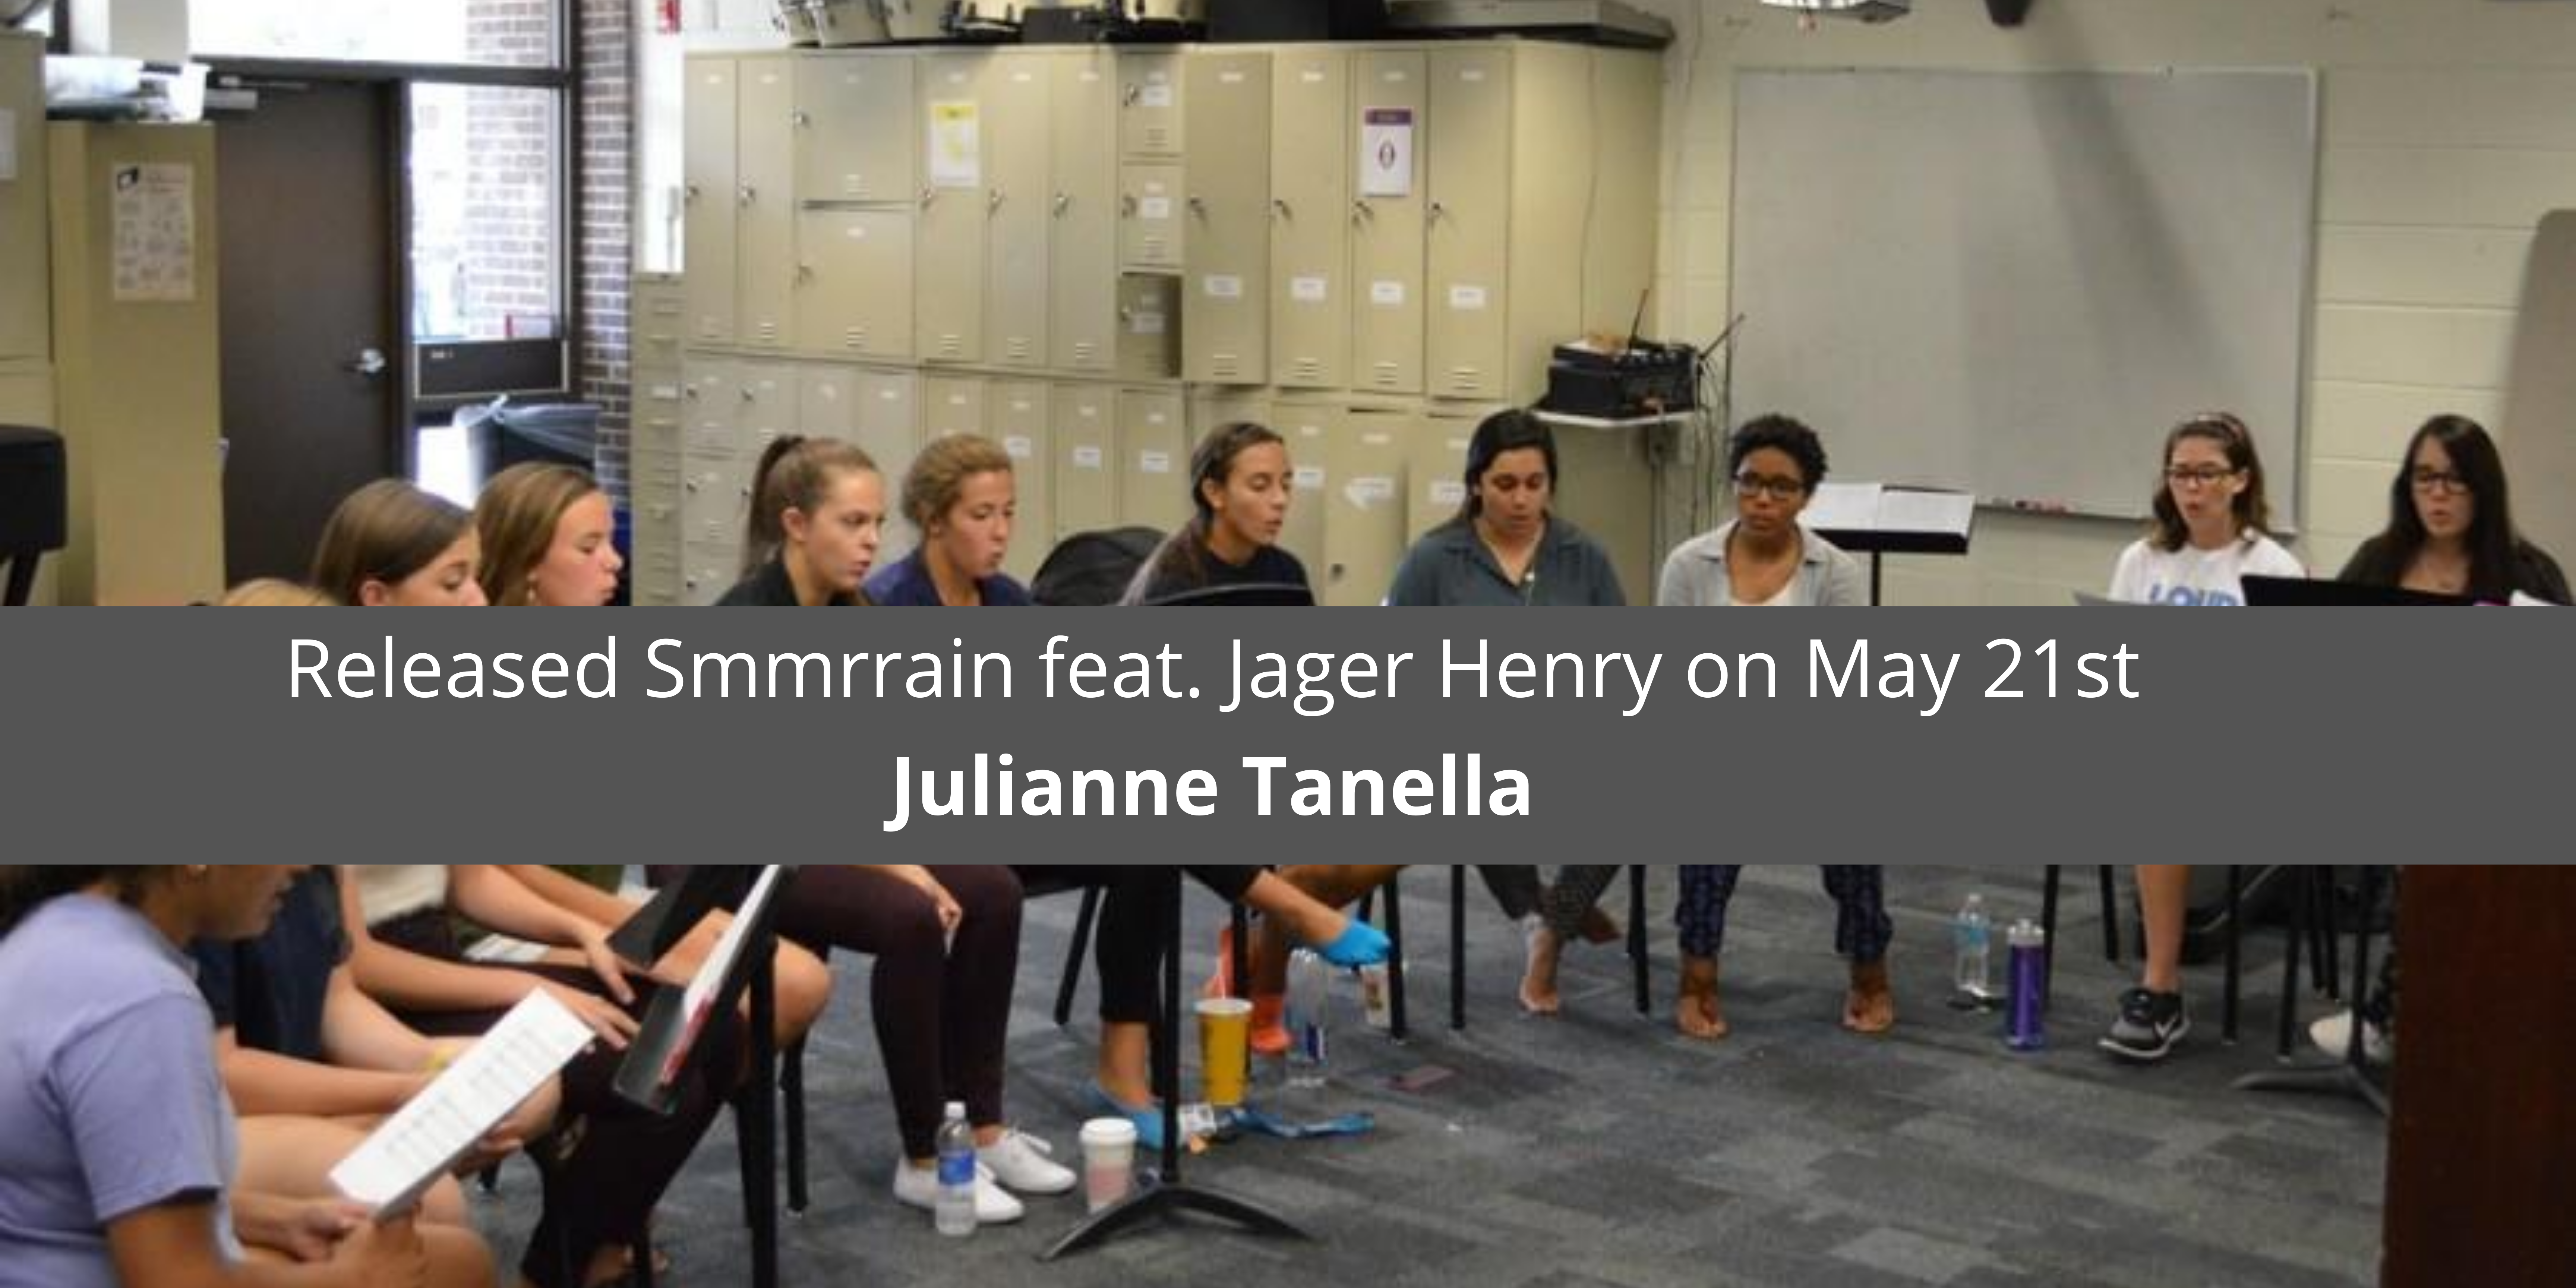 Julianne Tanella Released Smmrrain feat. Jager Henry on May 21st